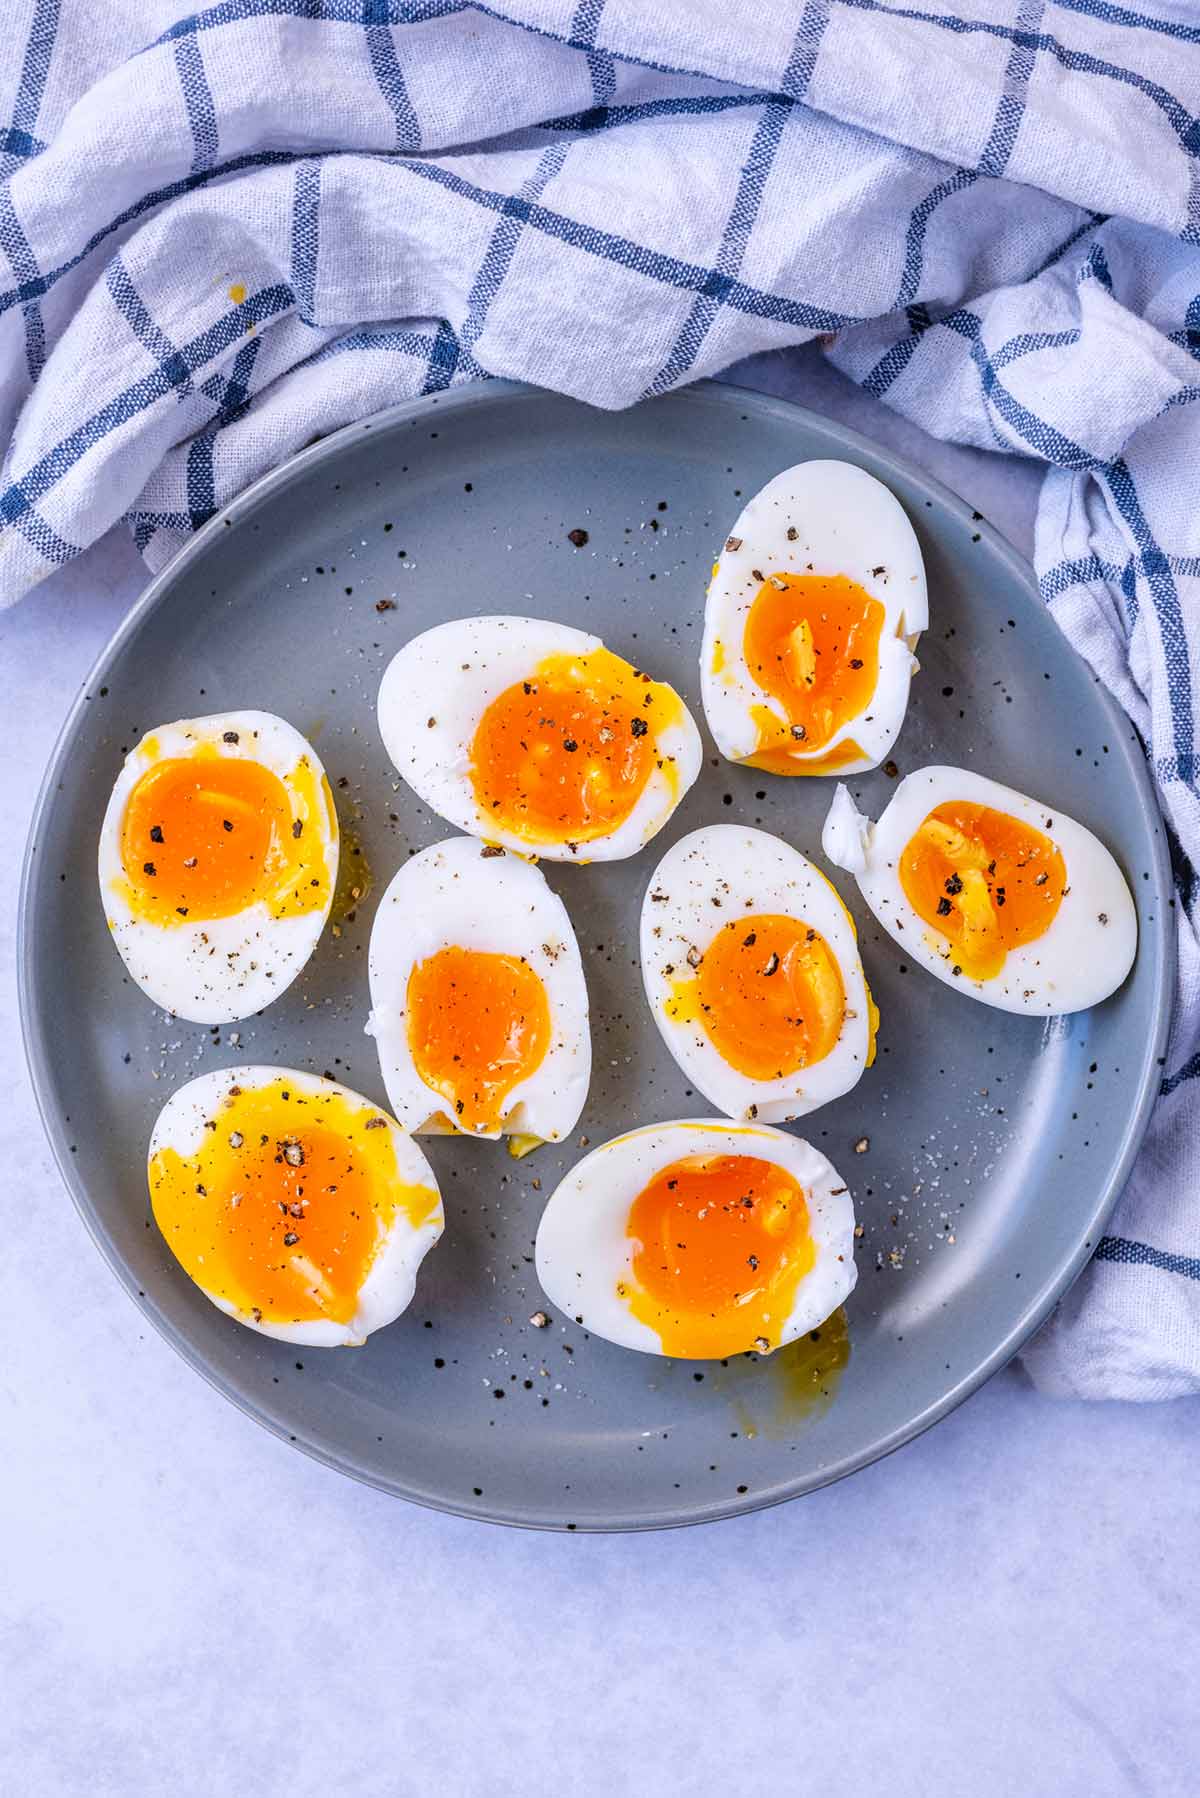 Eight boiled egg halves on a plate, all with runny yolks.